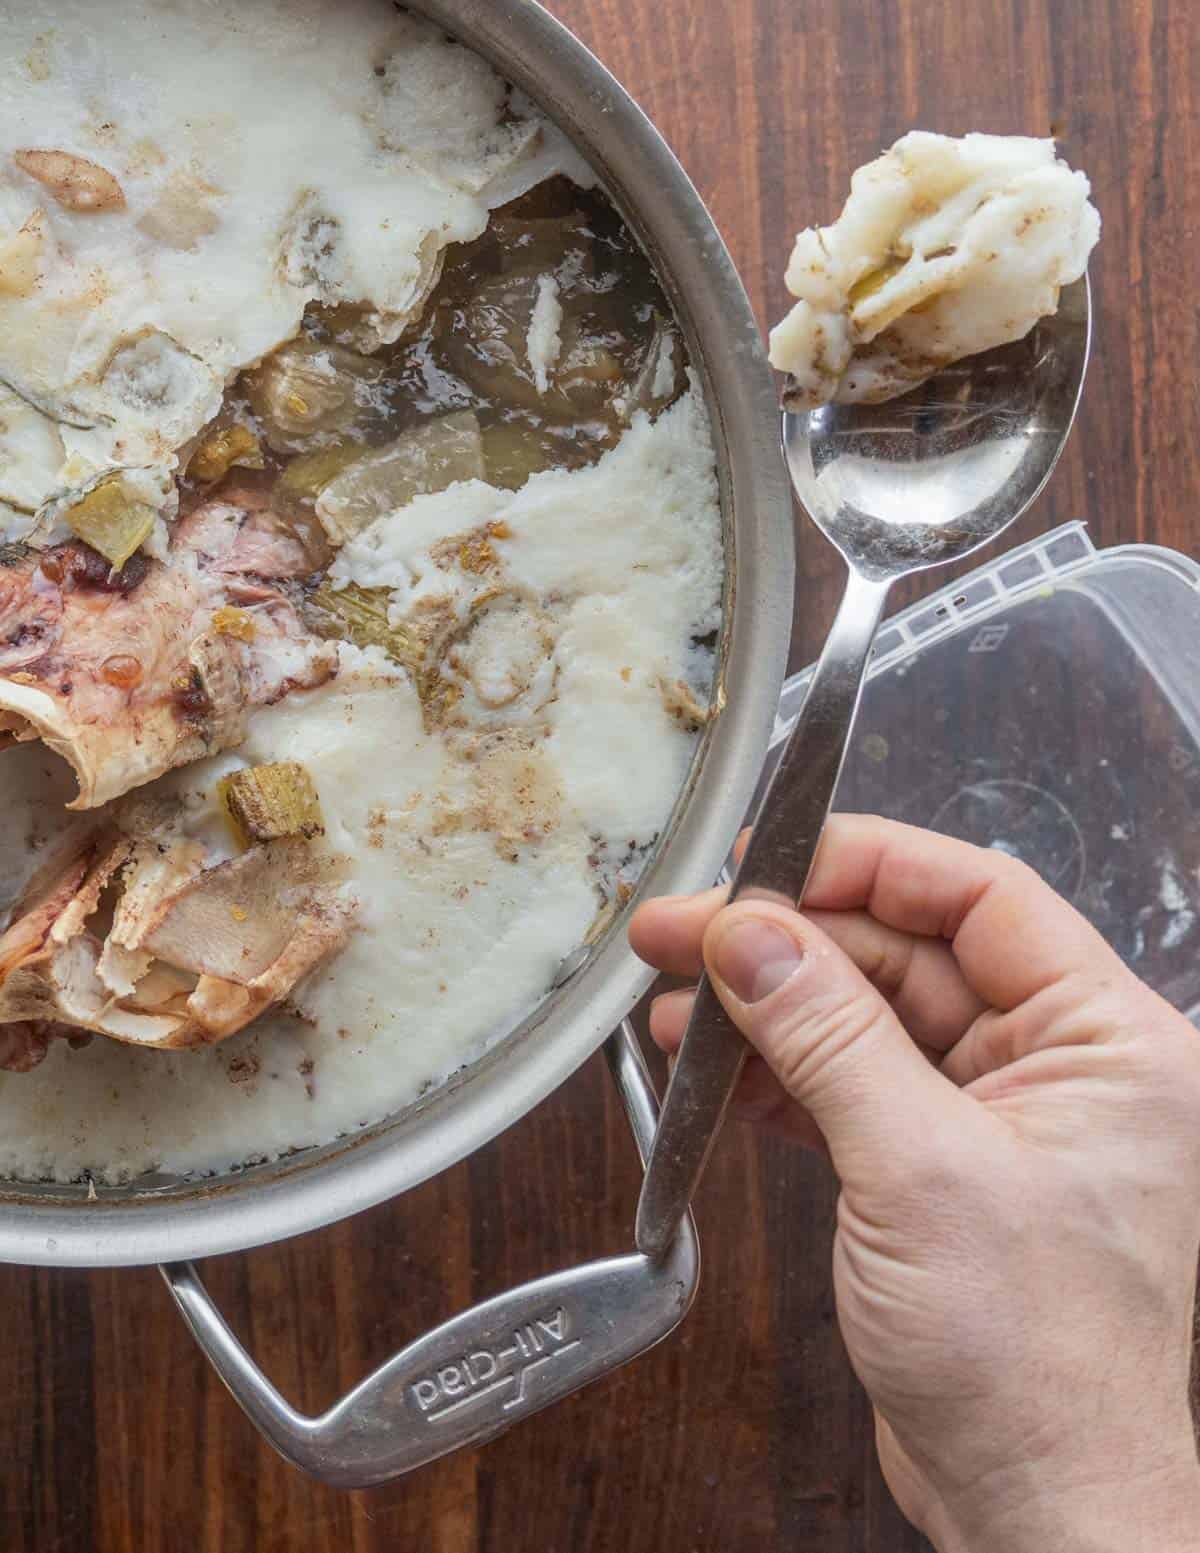 Removing pork fat from the top of a cooked pot of headcheese using a Kunz spoon. 